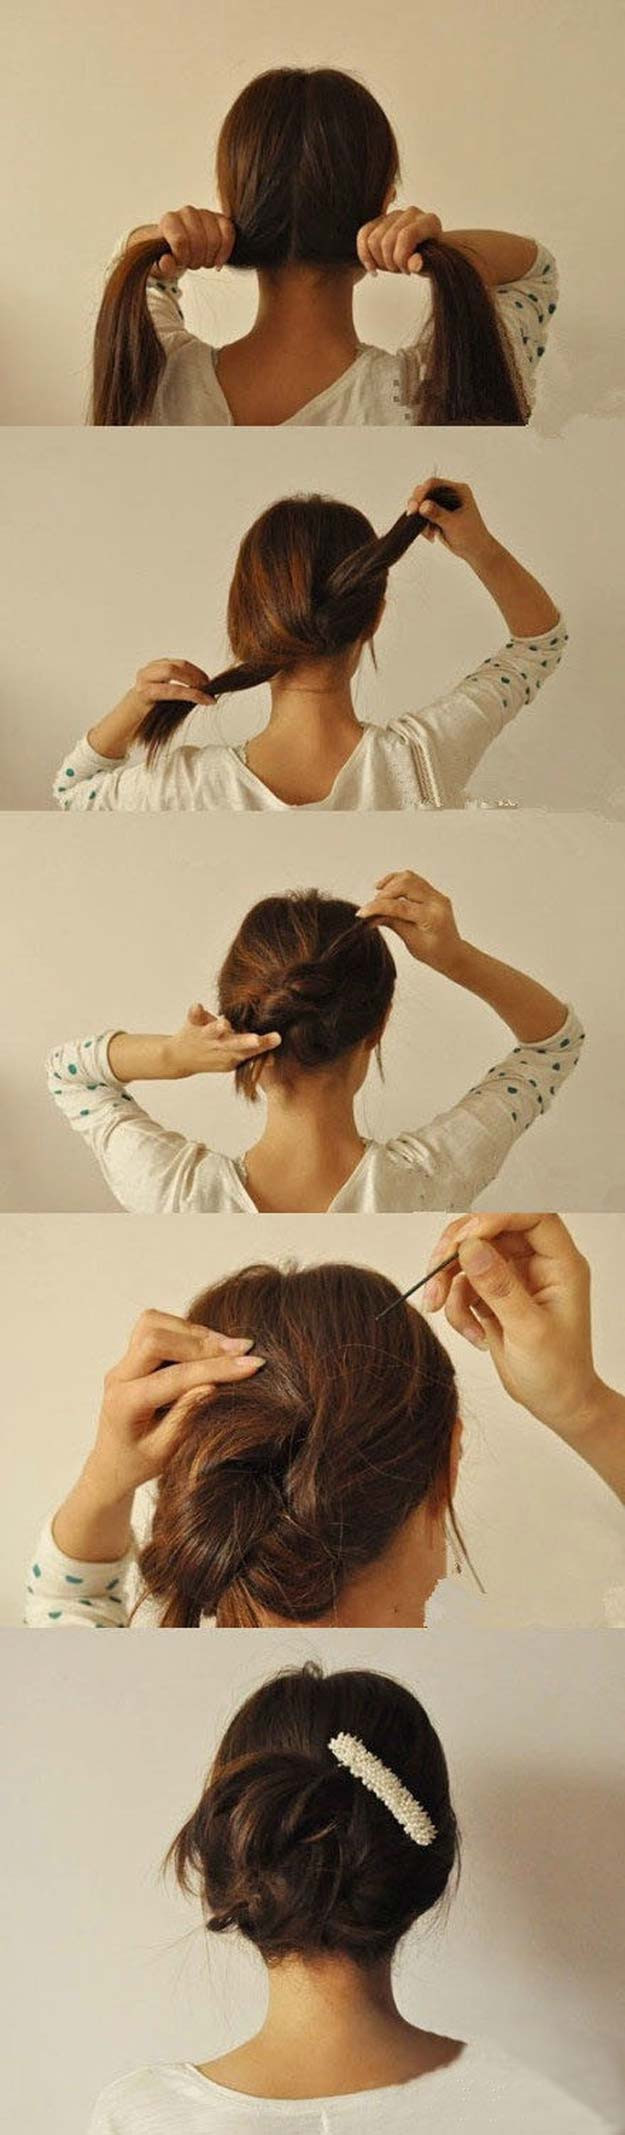 Quick DIY Hairstyles
 36 Best Hairstyles for Long Hair DIY Projects for Teens